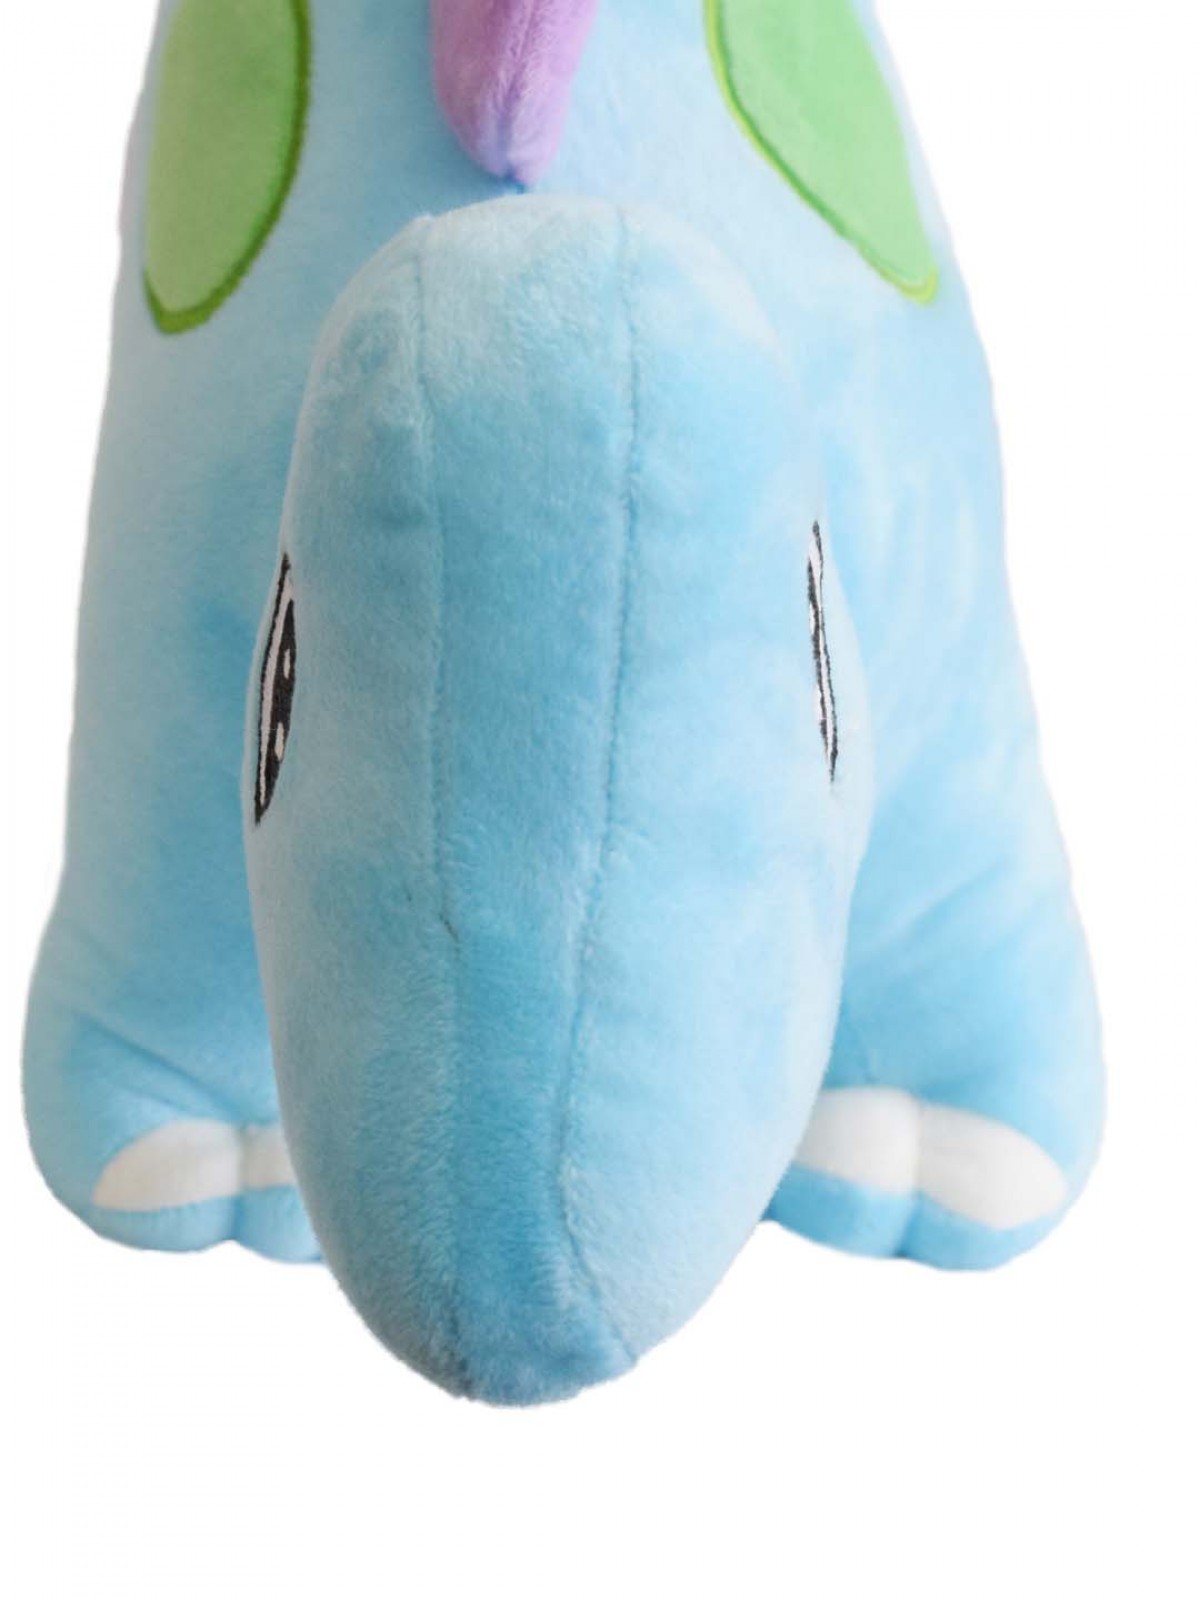 Adorable Stuffed Plush Dinosaur By Mirada, Soft Toys For Kids Of All Ages, 3Y+, Blue, 50Cm